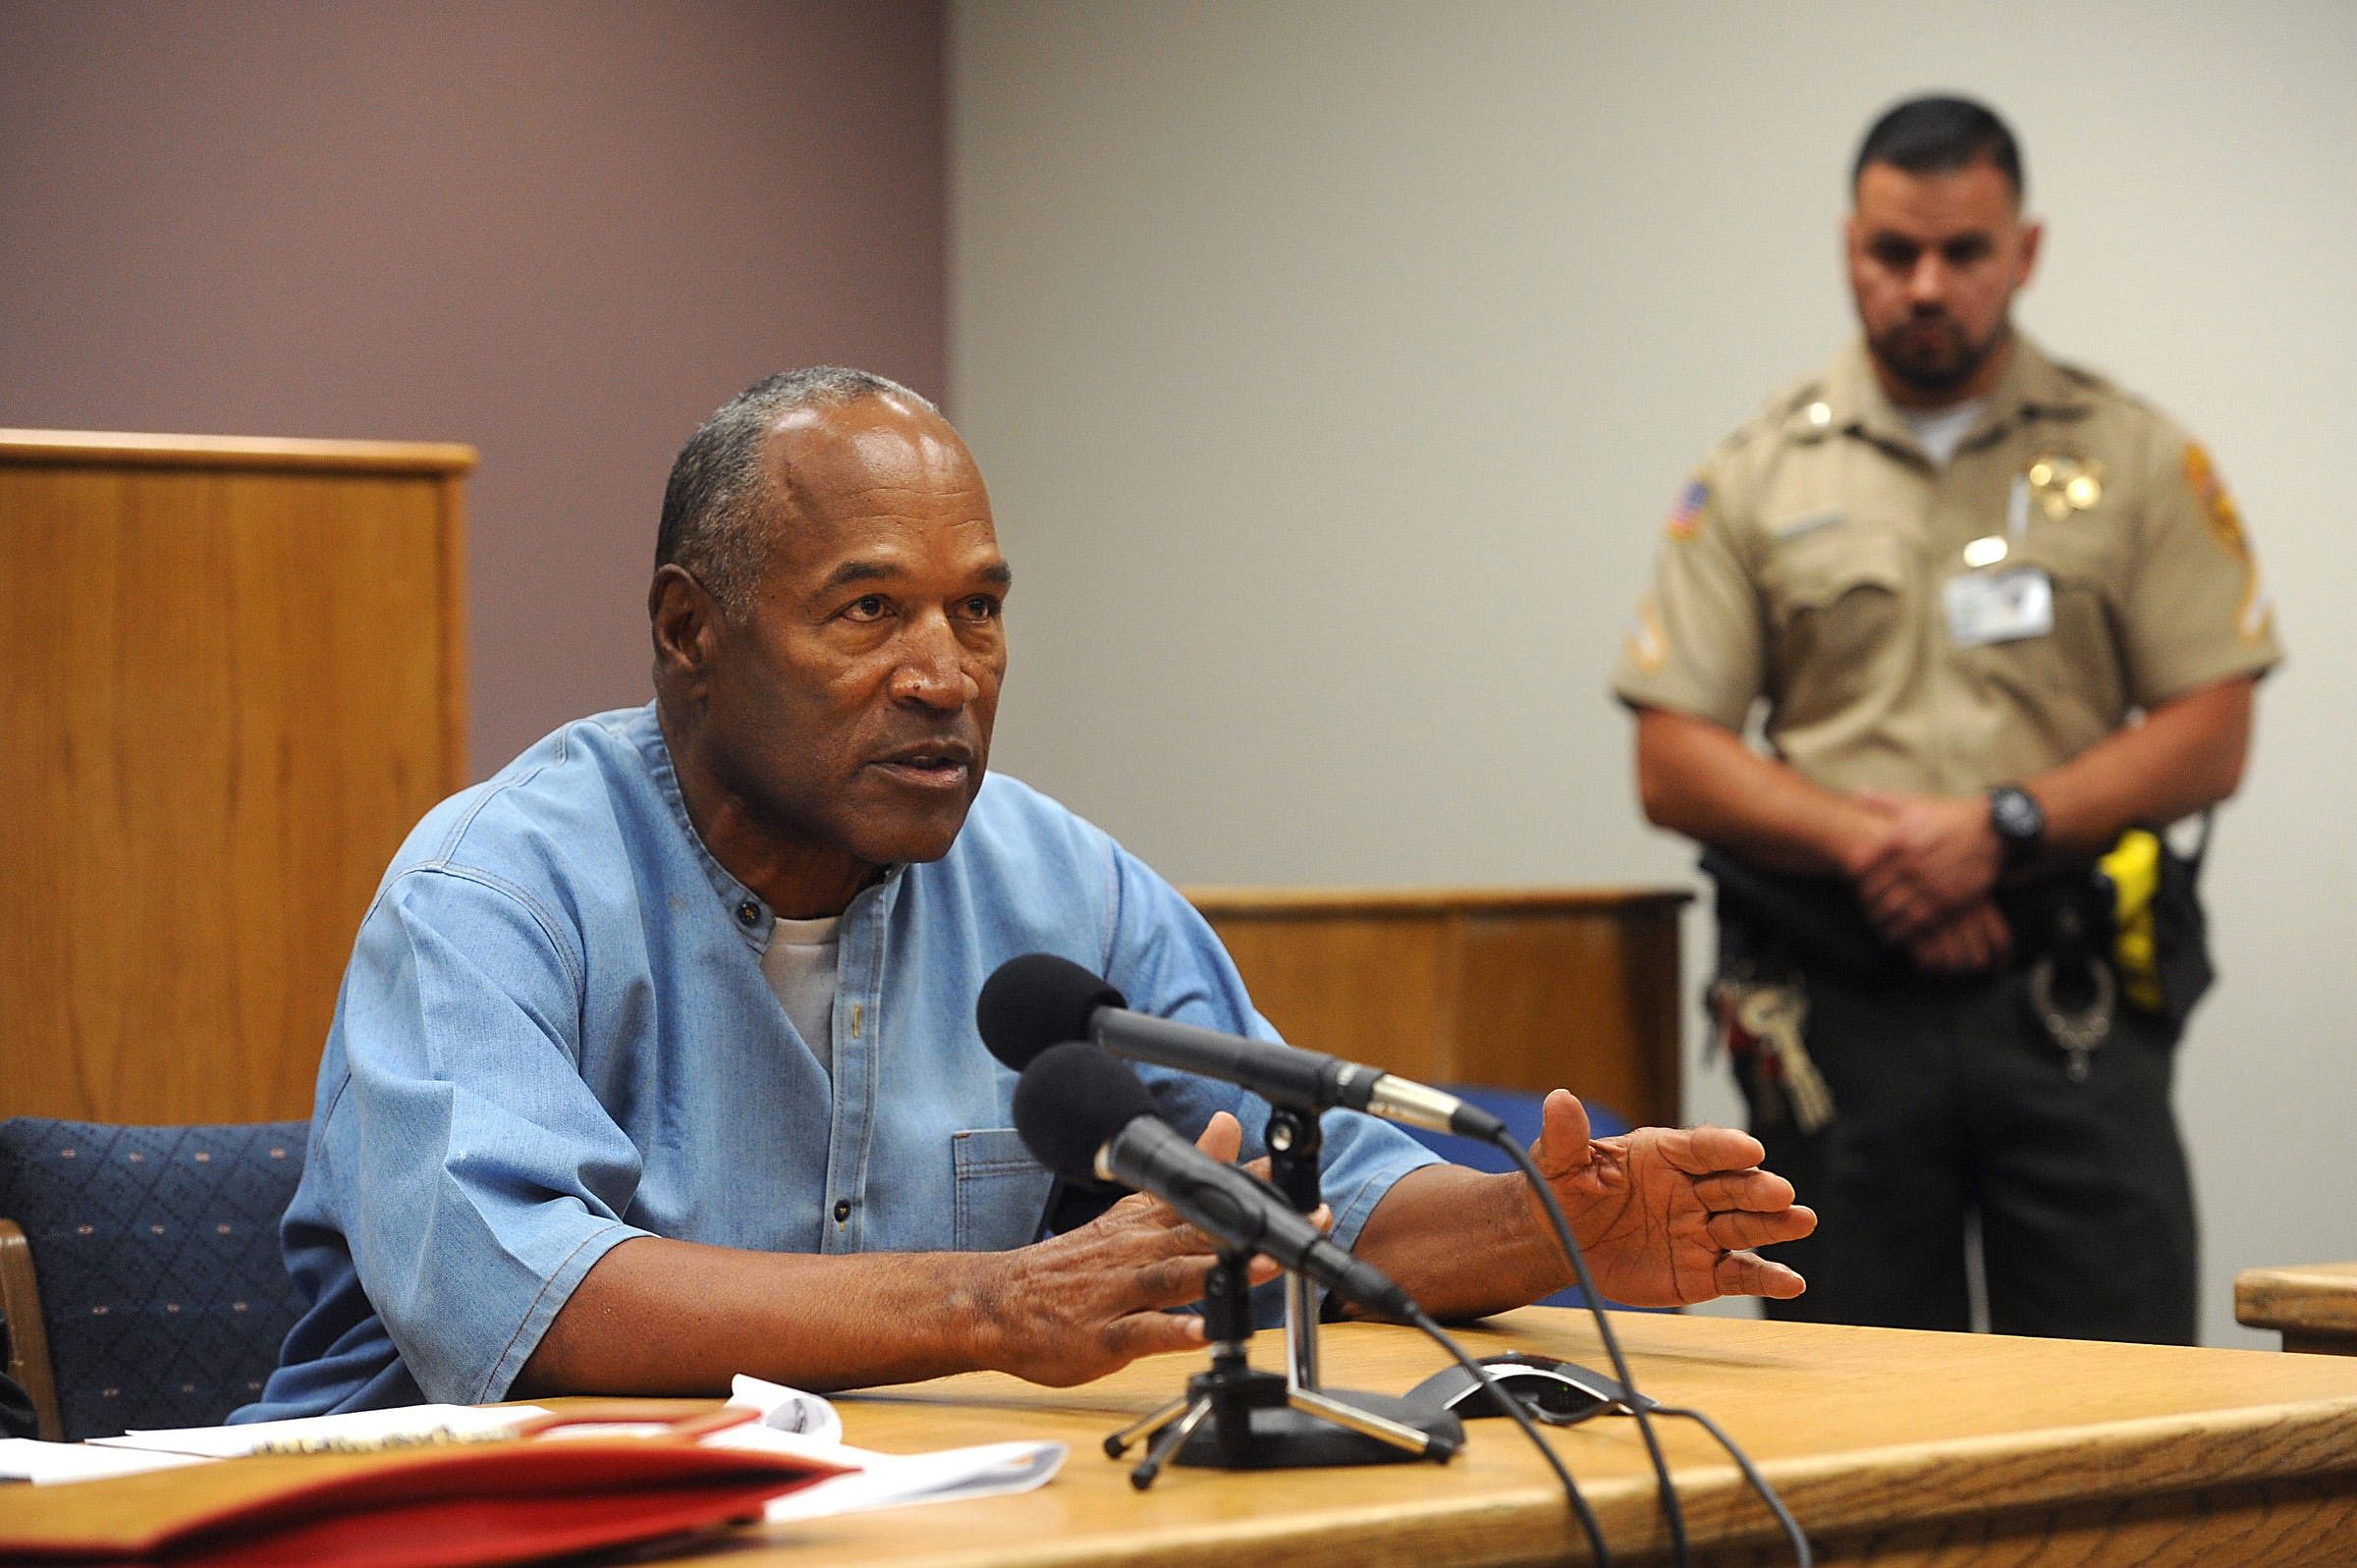 OJ Simpson argues for his freedom